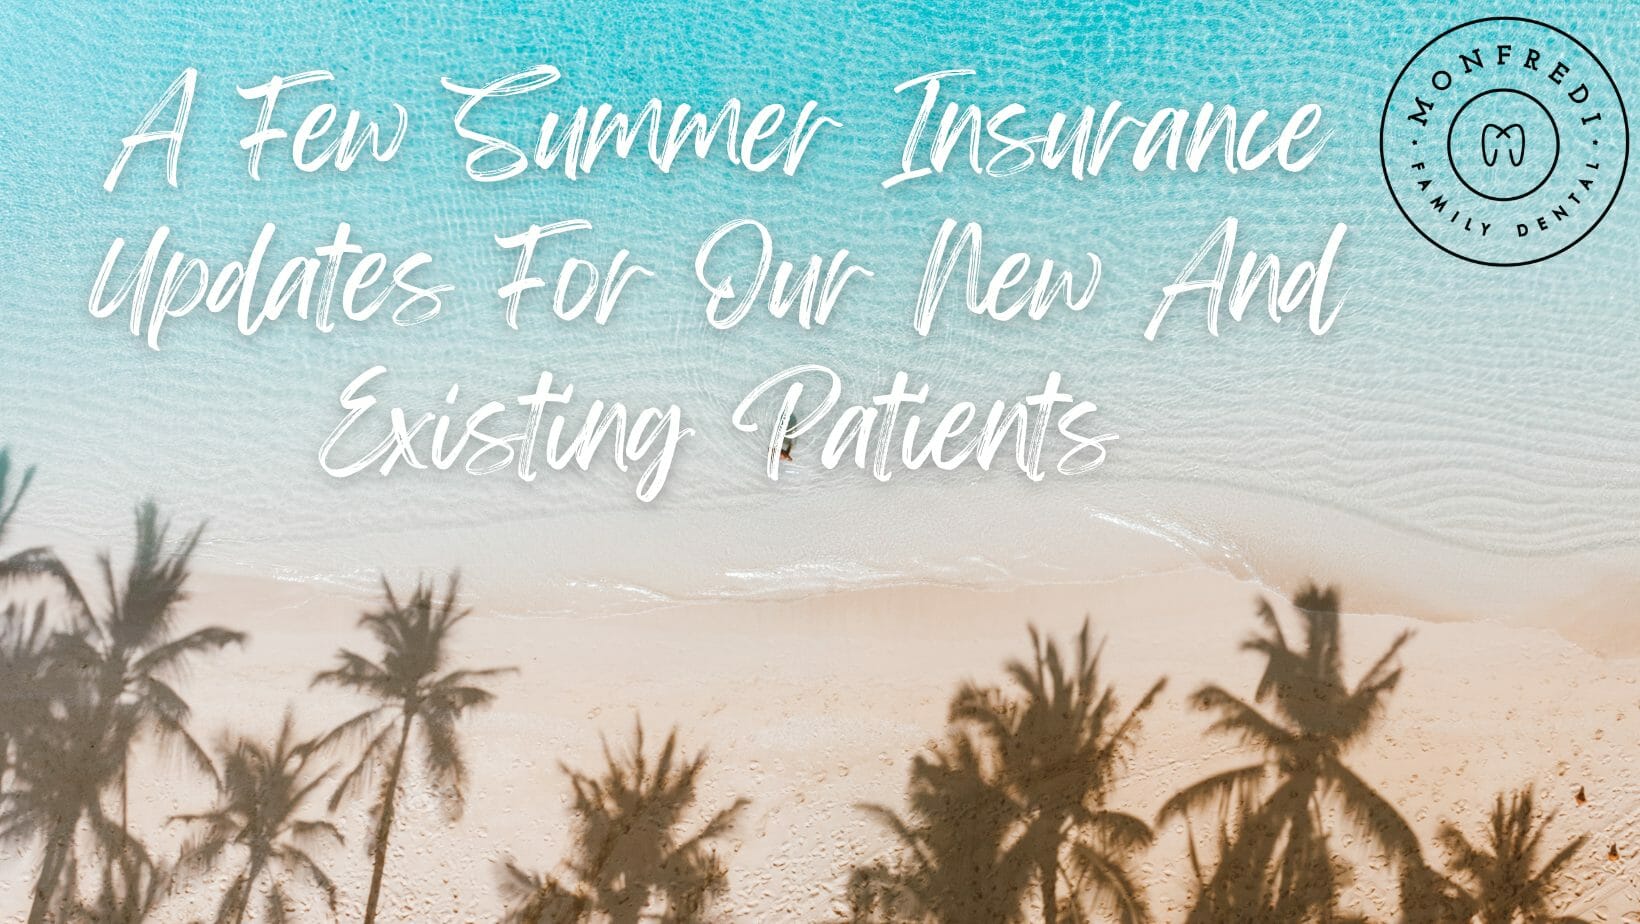 A Few Summer Insurance Updates For Our New And Existing Patients